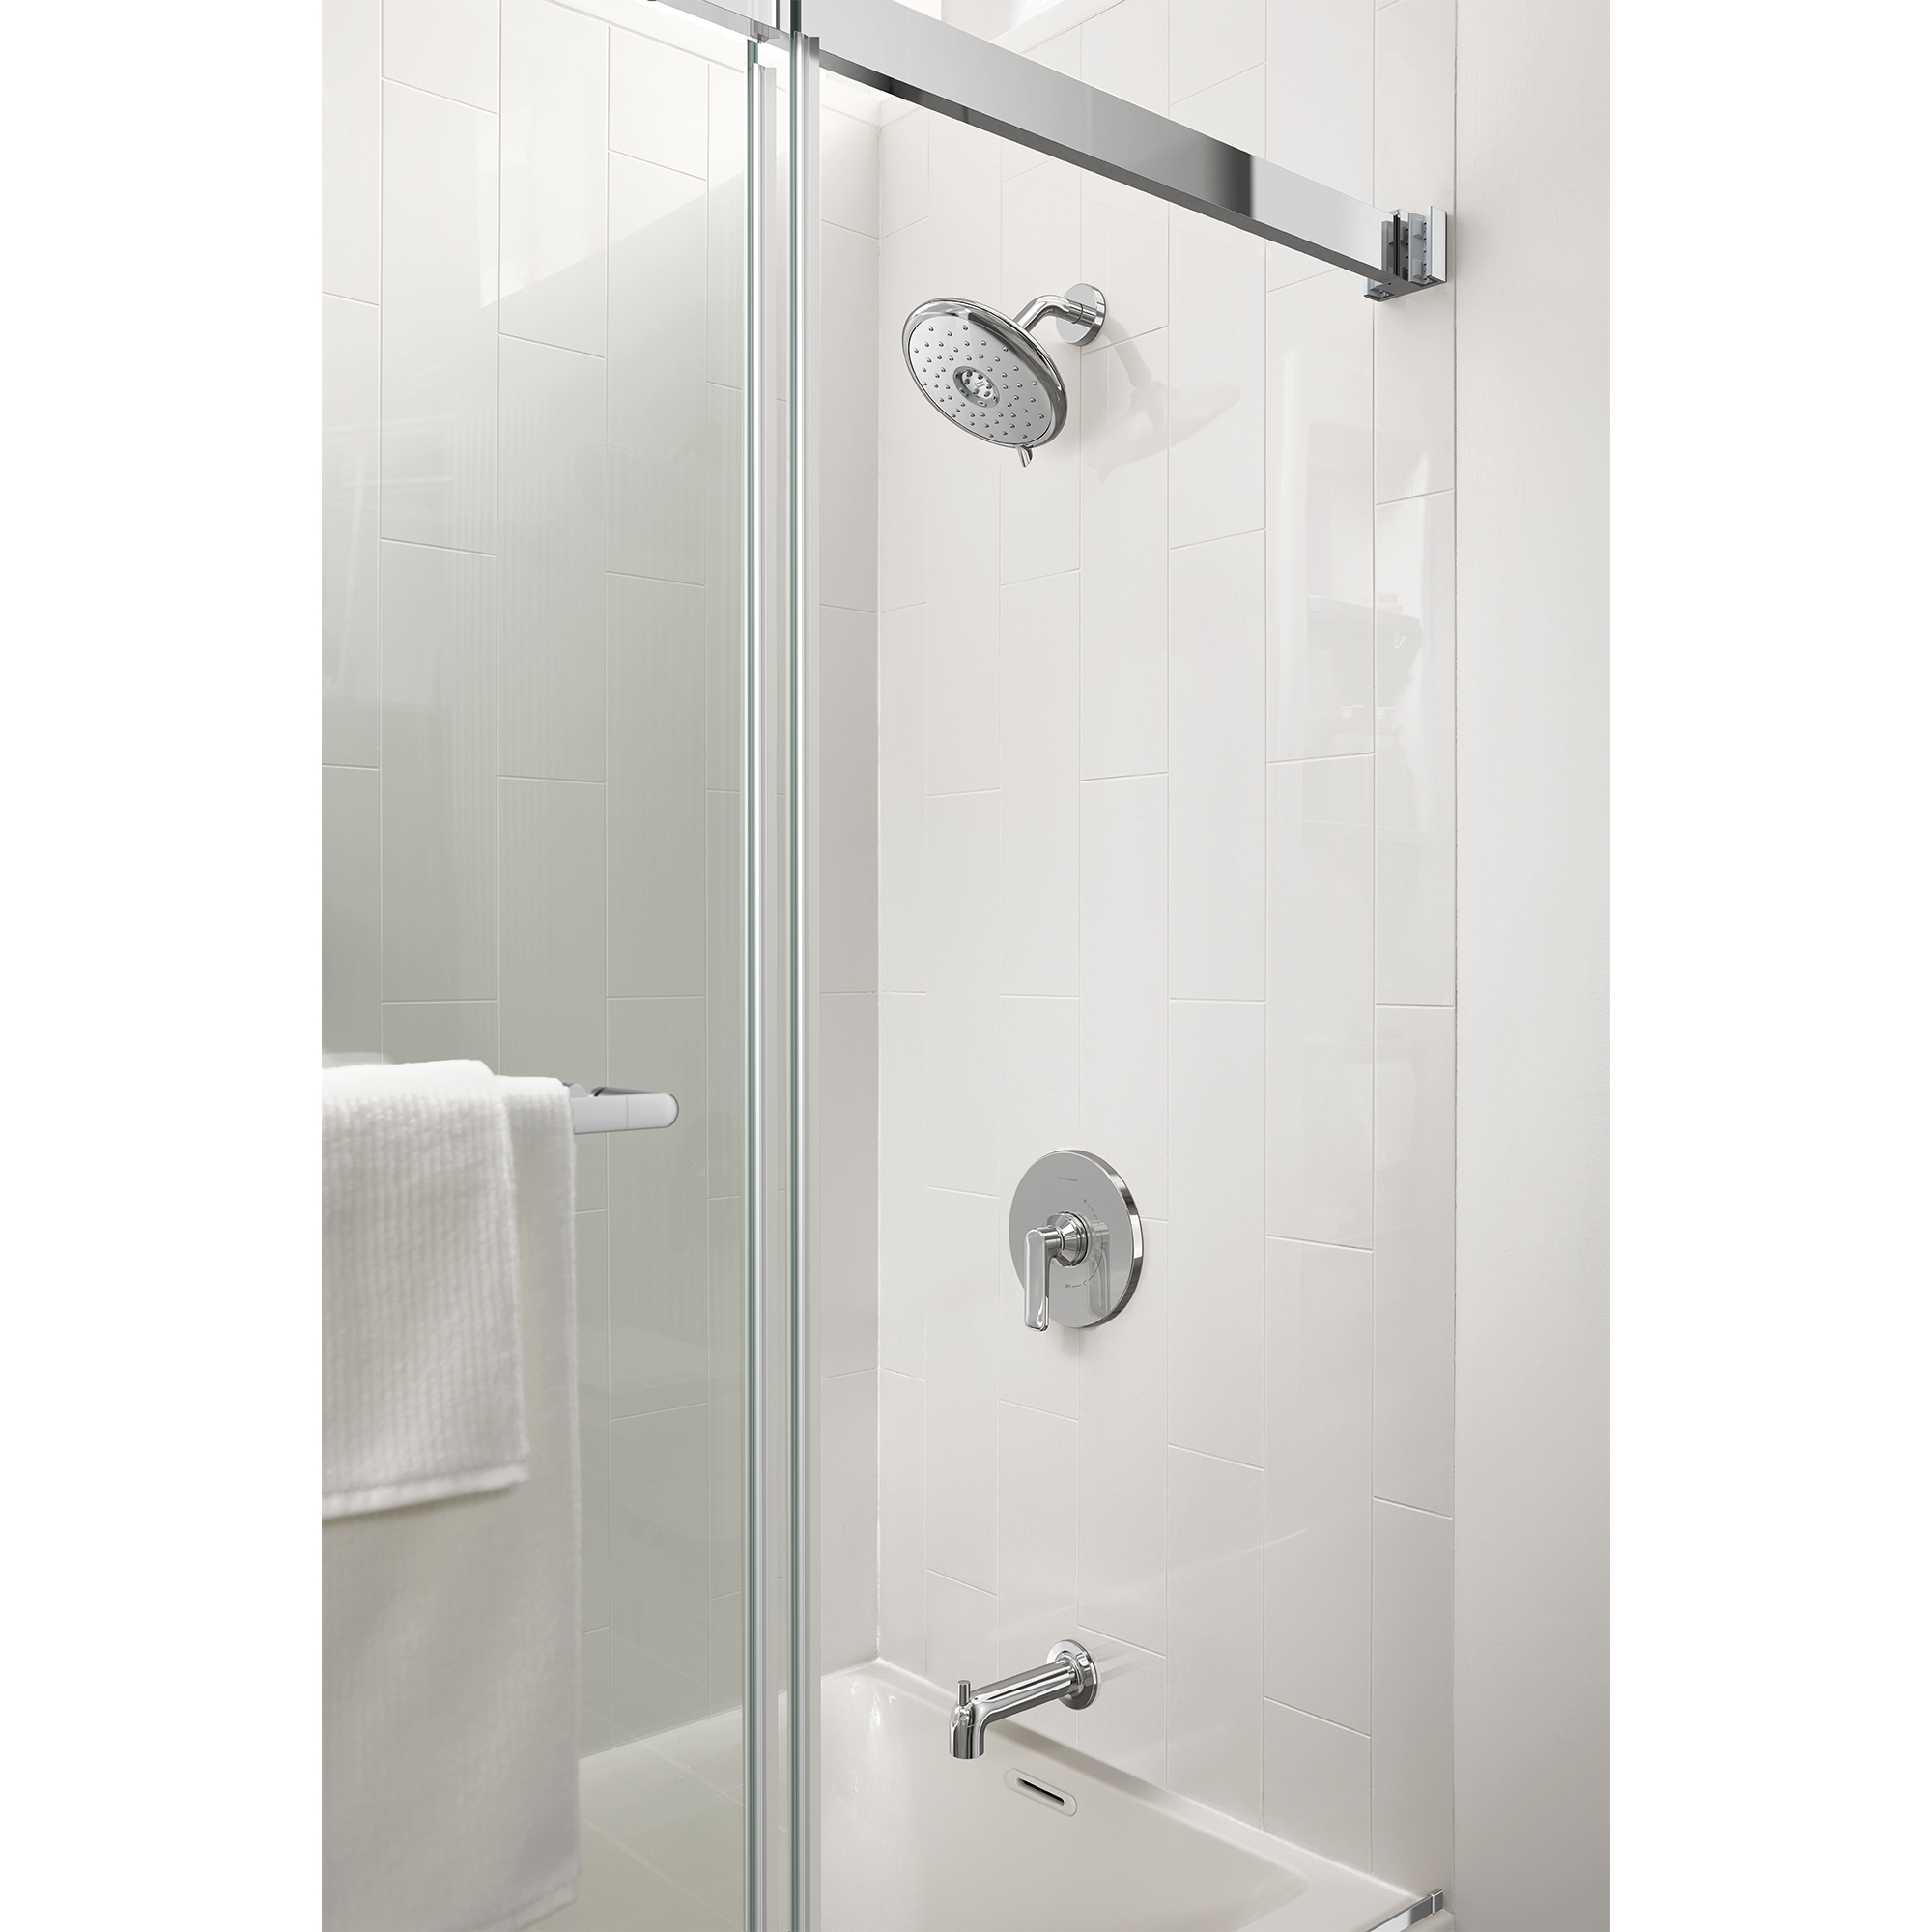 Aspirations™ 1.8 gpm/6.8 L/min Tub and Shower Trim Kit With Water-Saving Showerhead and Double Ceramic Pressure Balance Cartridge With Lever Handle